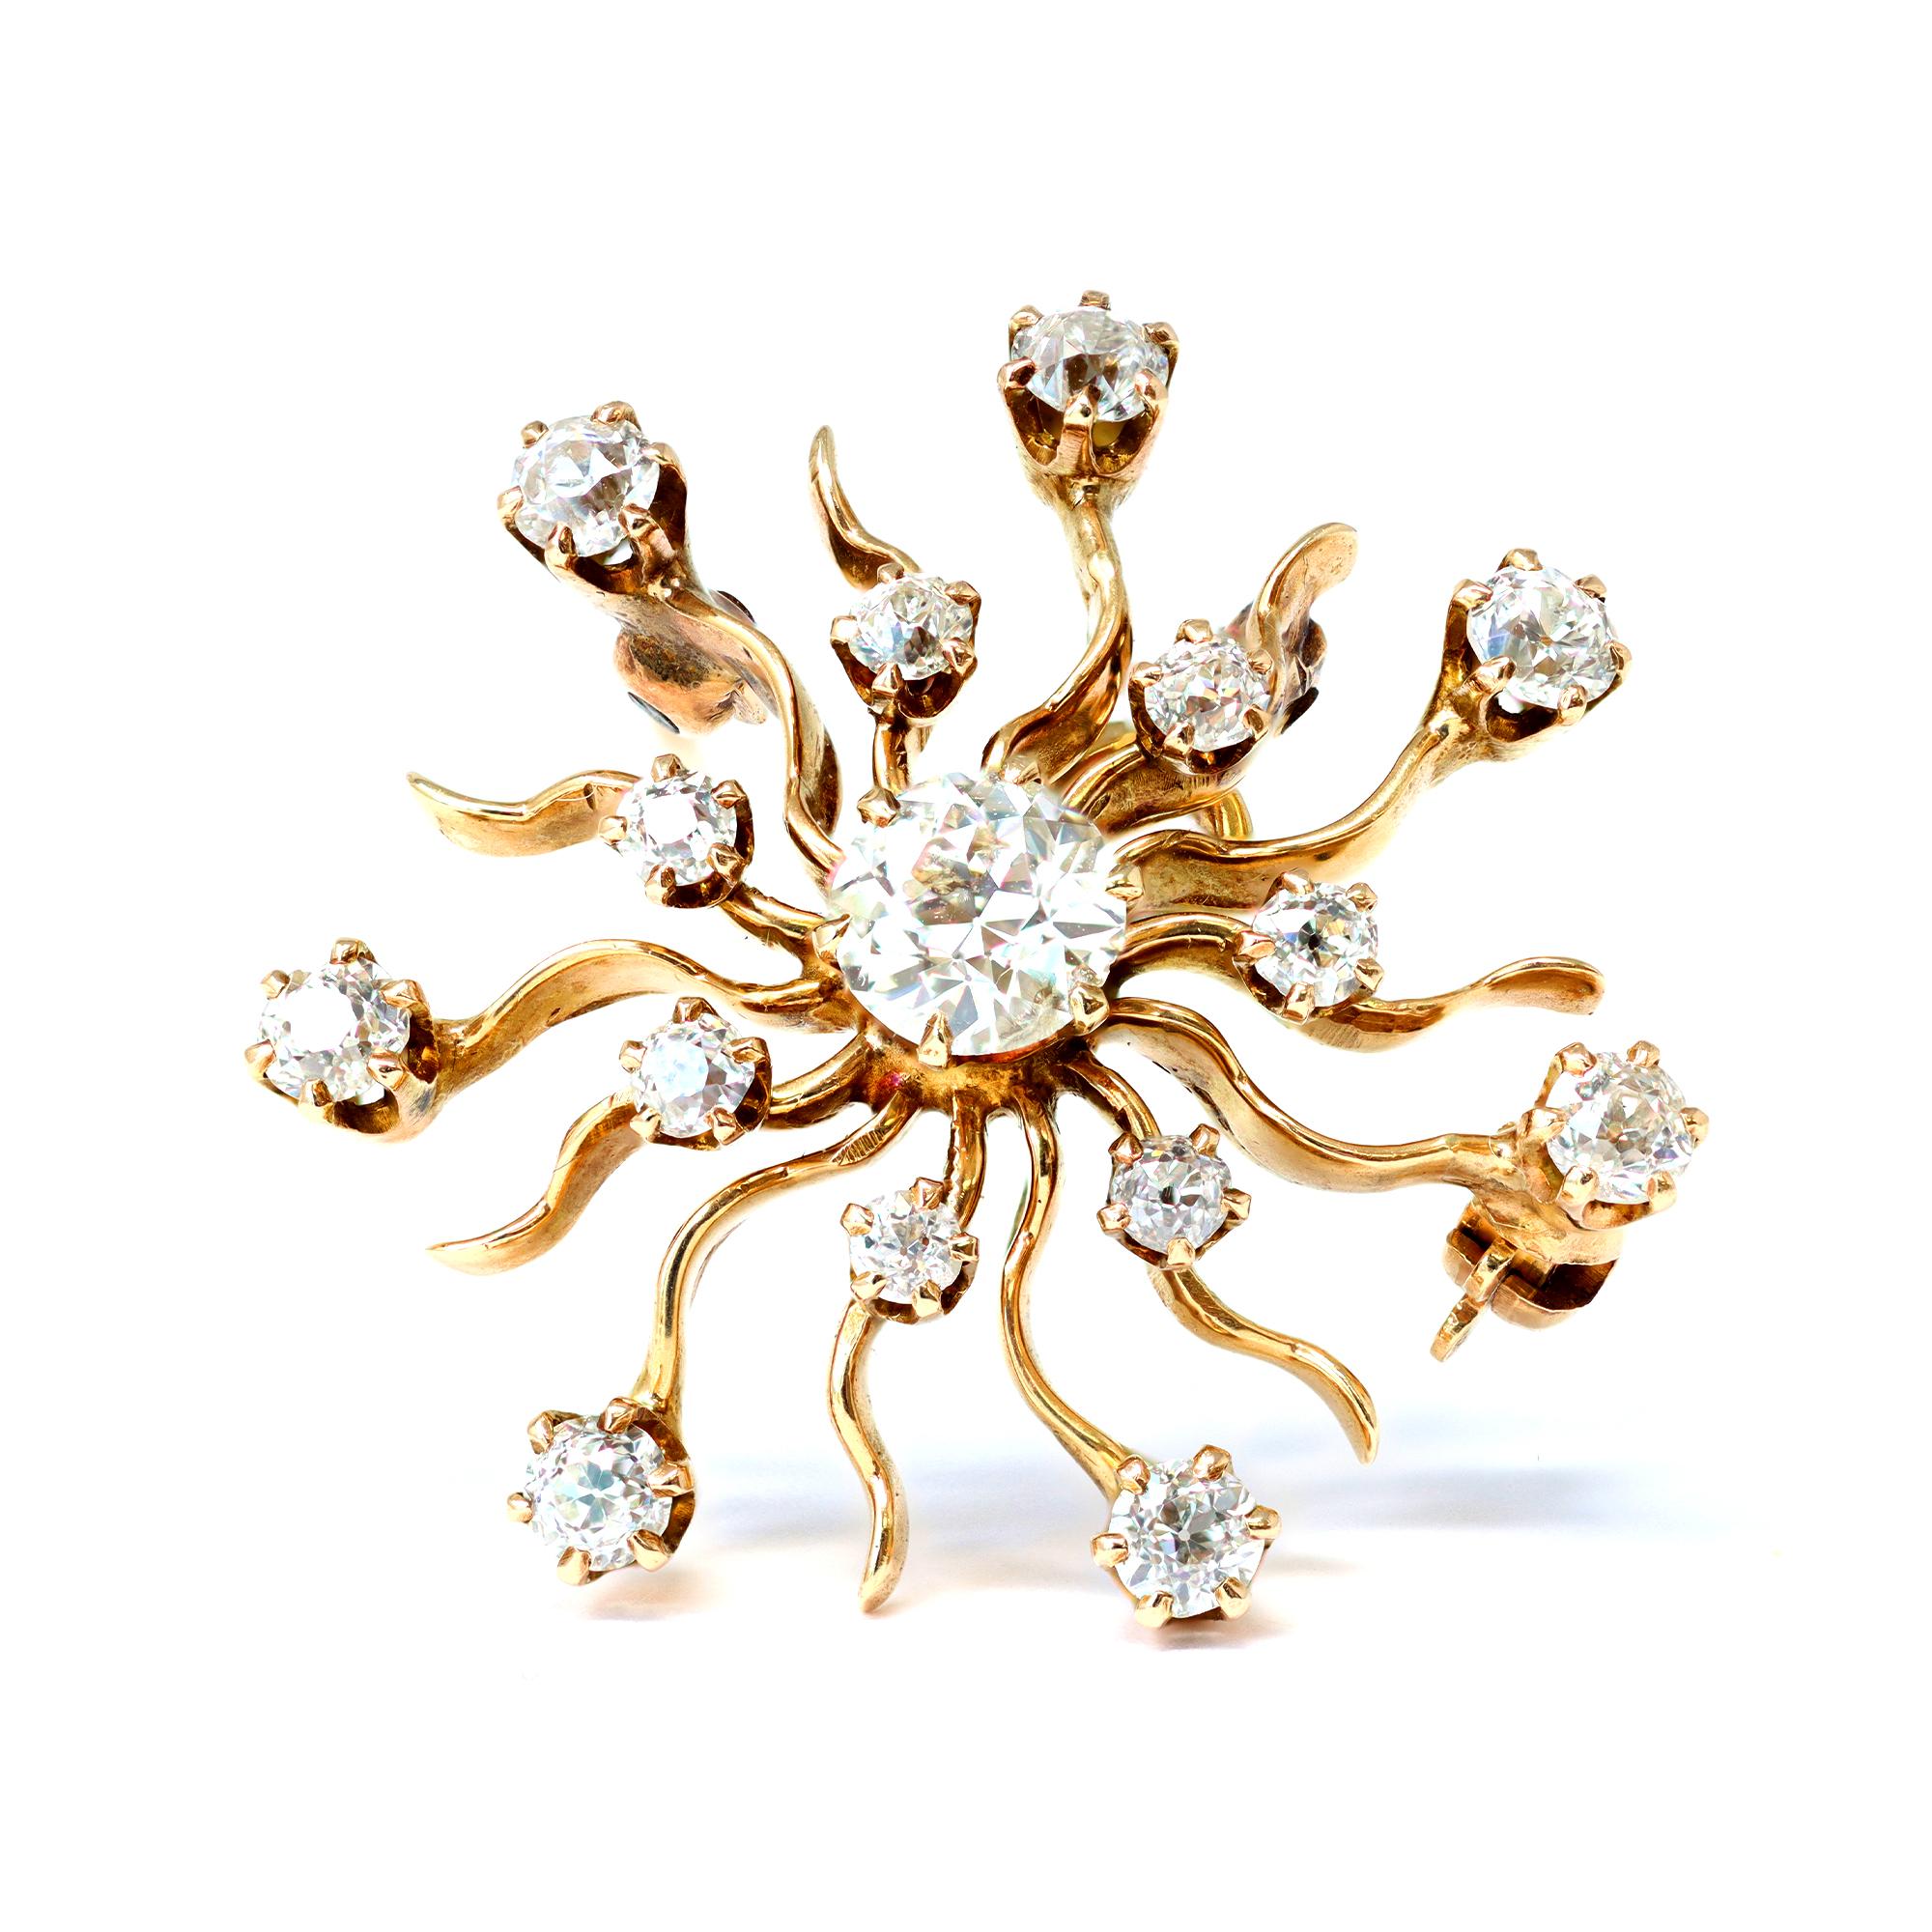 A classic and popular design straight from the Victorian era, Circa 1880-90, featuring a diamond starburst Brooch/pendant set in 14 katat yellow gold. The piece is set with old mine cut diamonds with an estimated weight of 1.82 carats, LMN color, SI